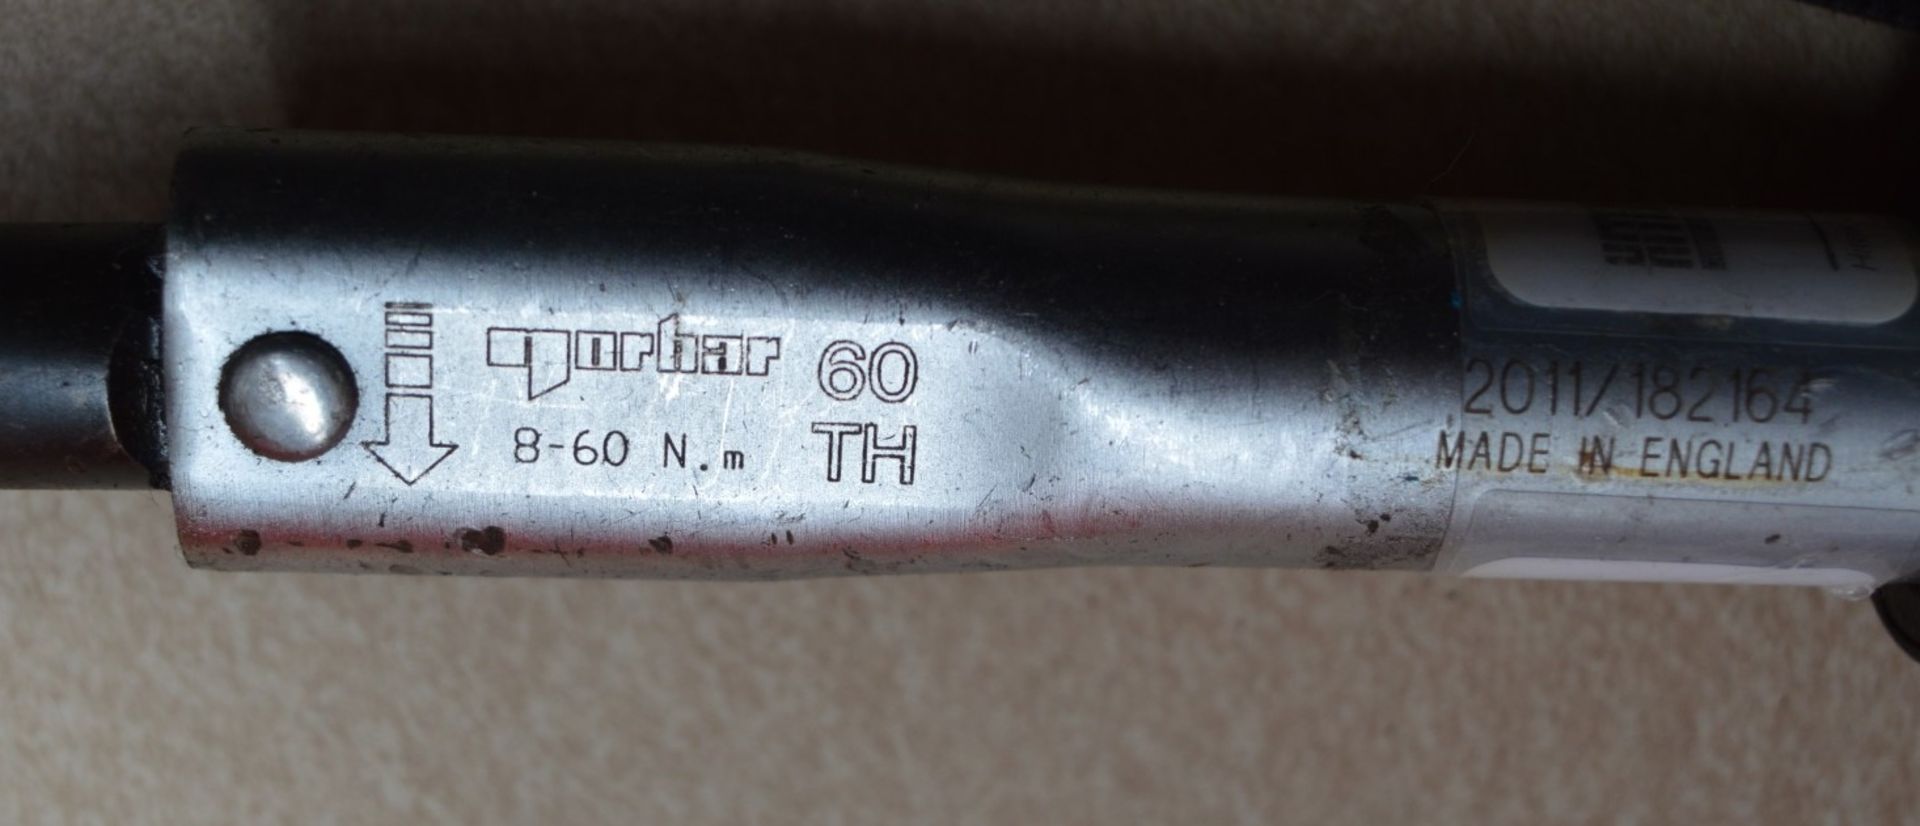 1 x Norbar 60TH Torque Wrench Handle 8-60Nm - CL011 - Ref JP932 - Location: Altrincham WA14 - Image 2 of 2